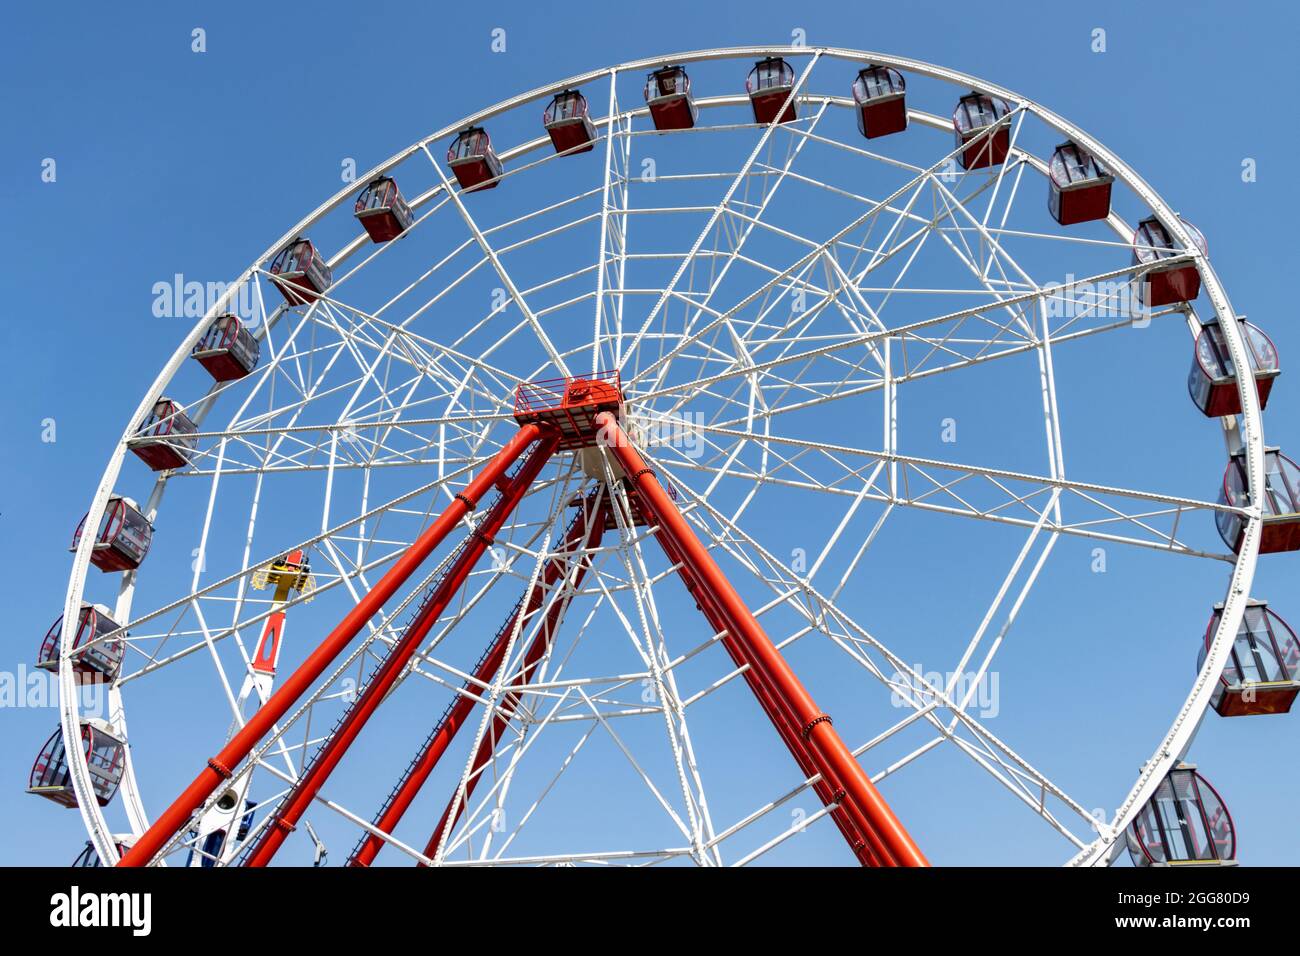 Ferris wheel turns on a sunny day at amusement park. No people Stock Photo